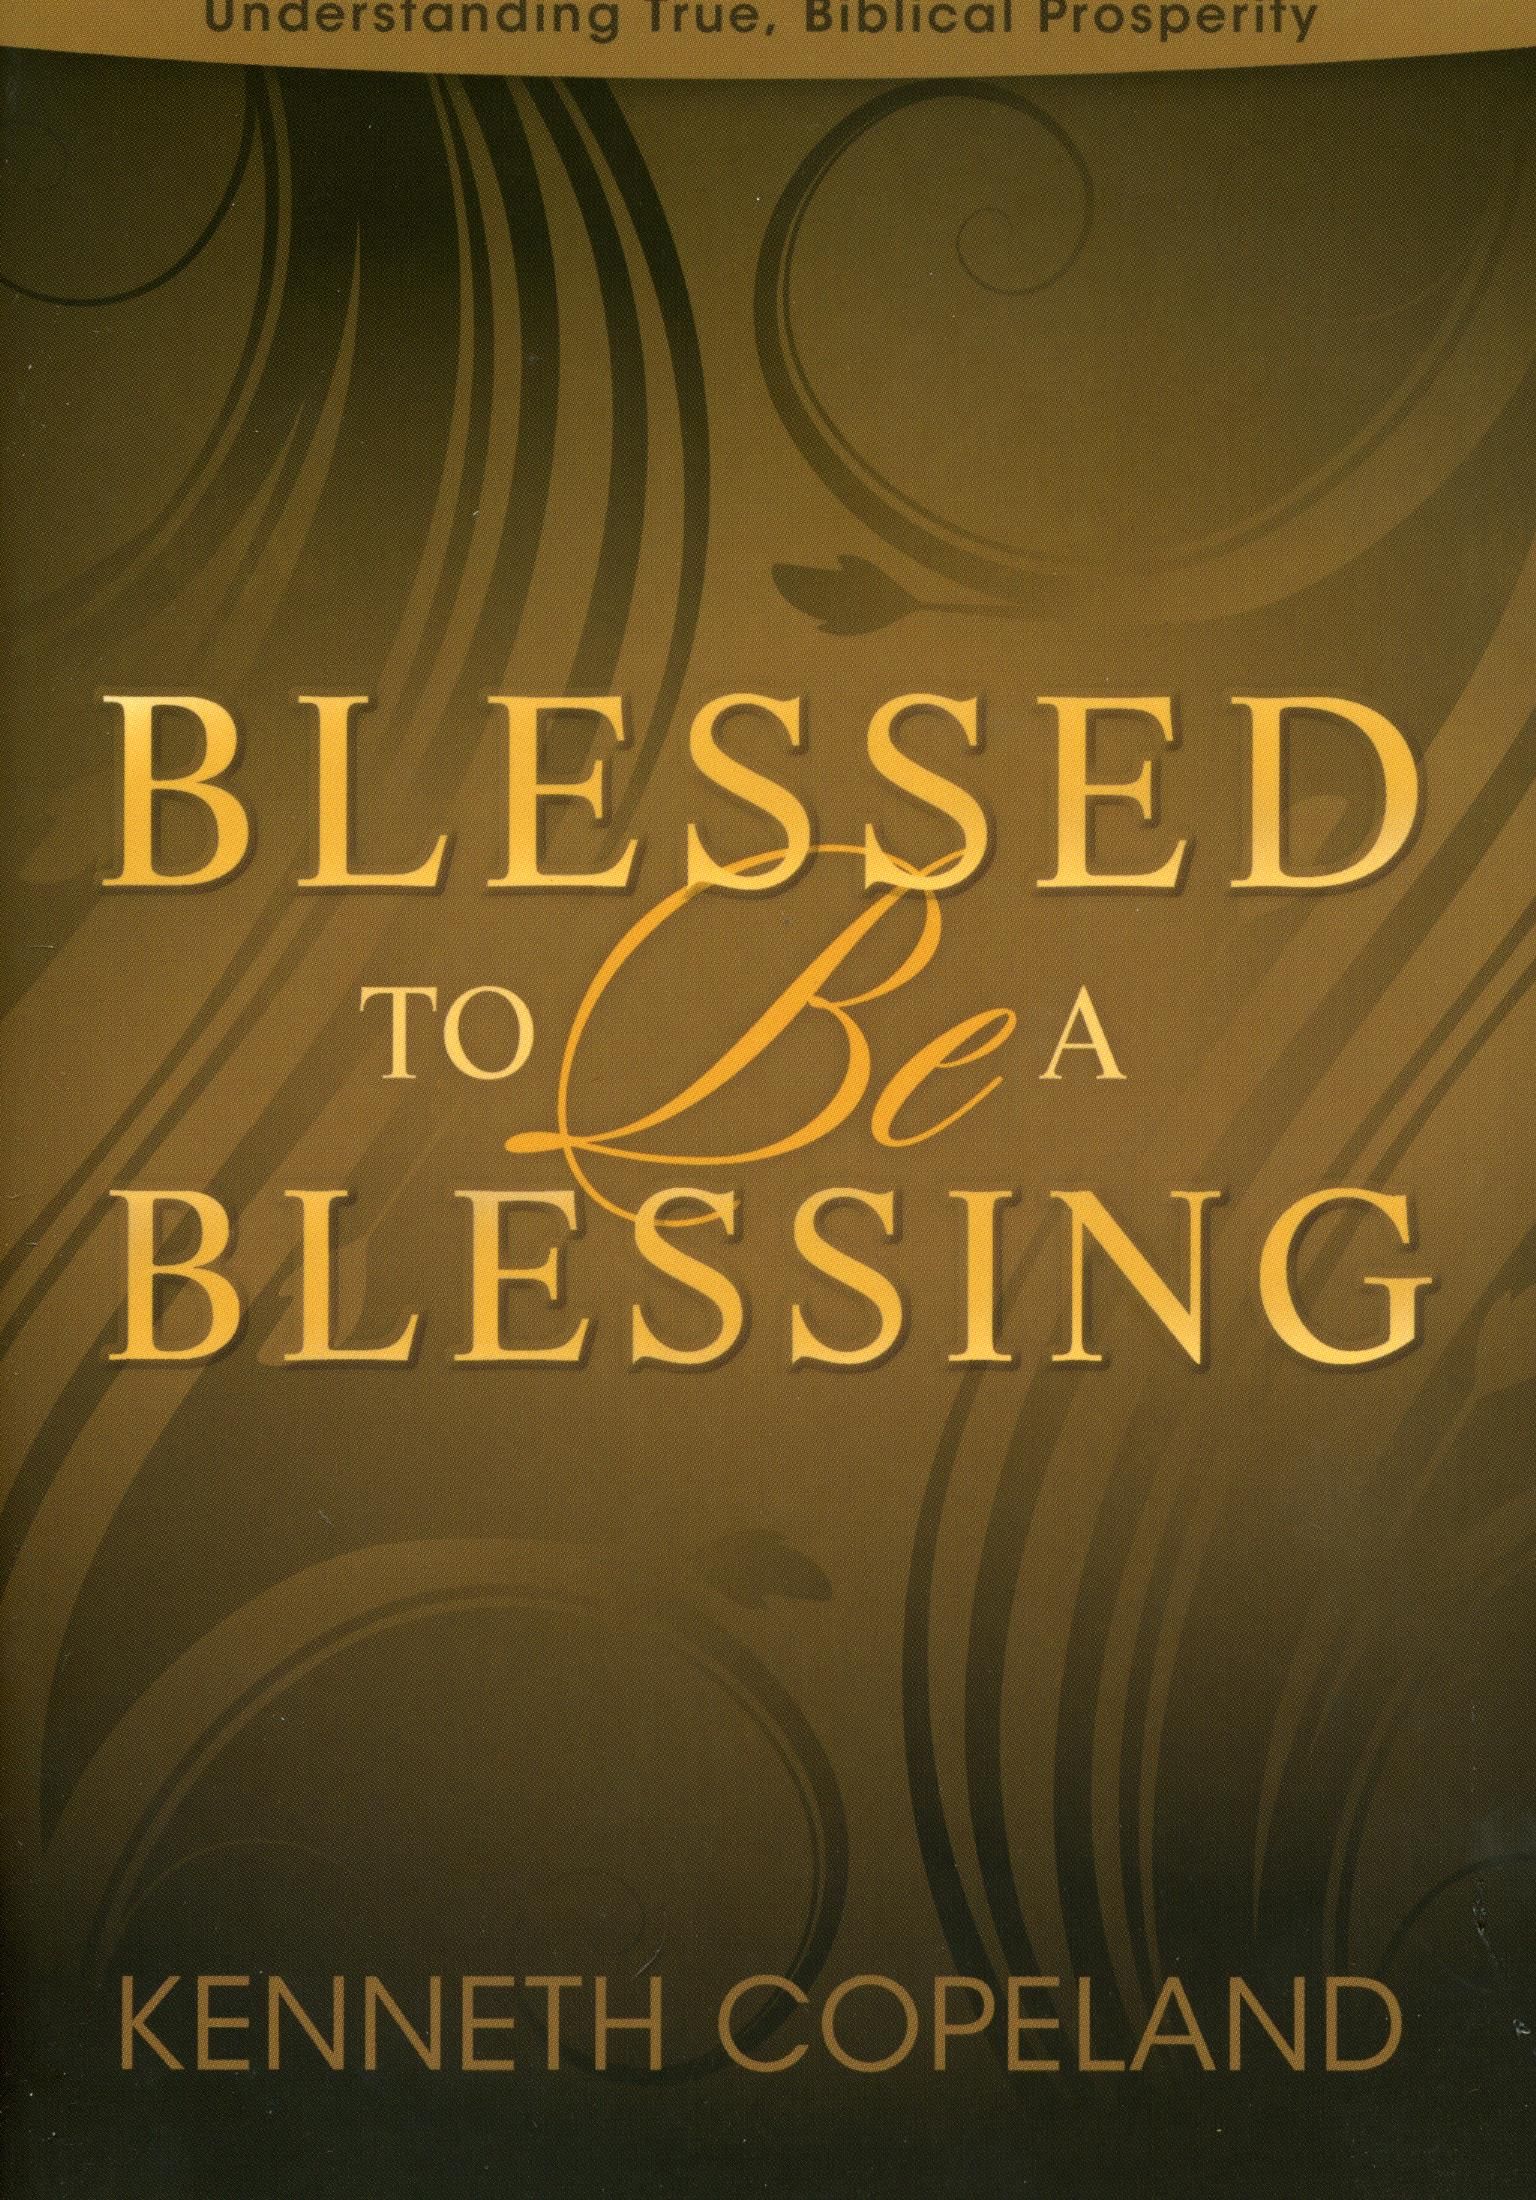 Englische Bücher - K. Copeland: Blessed to Be a Blessing